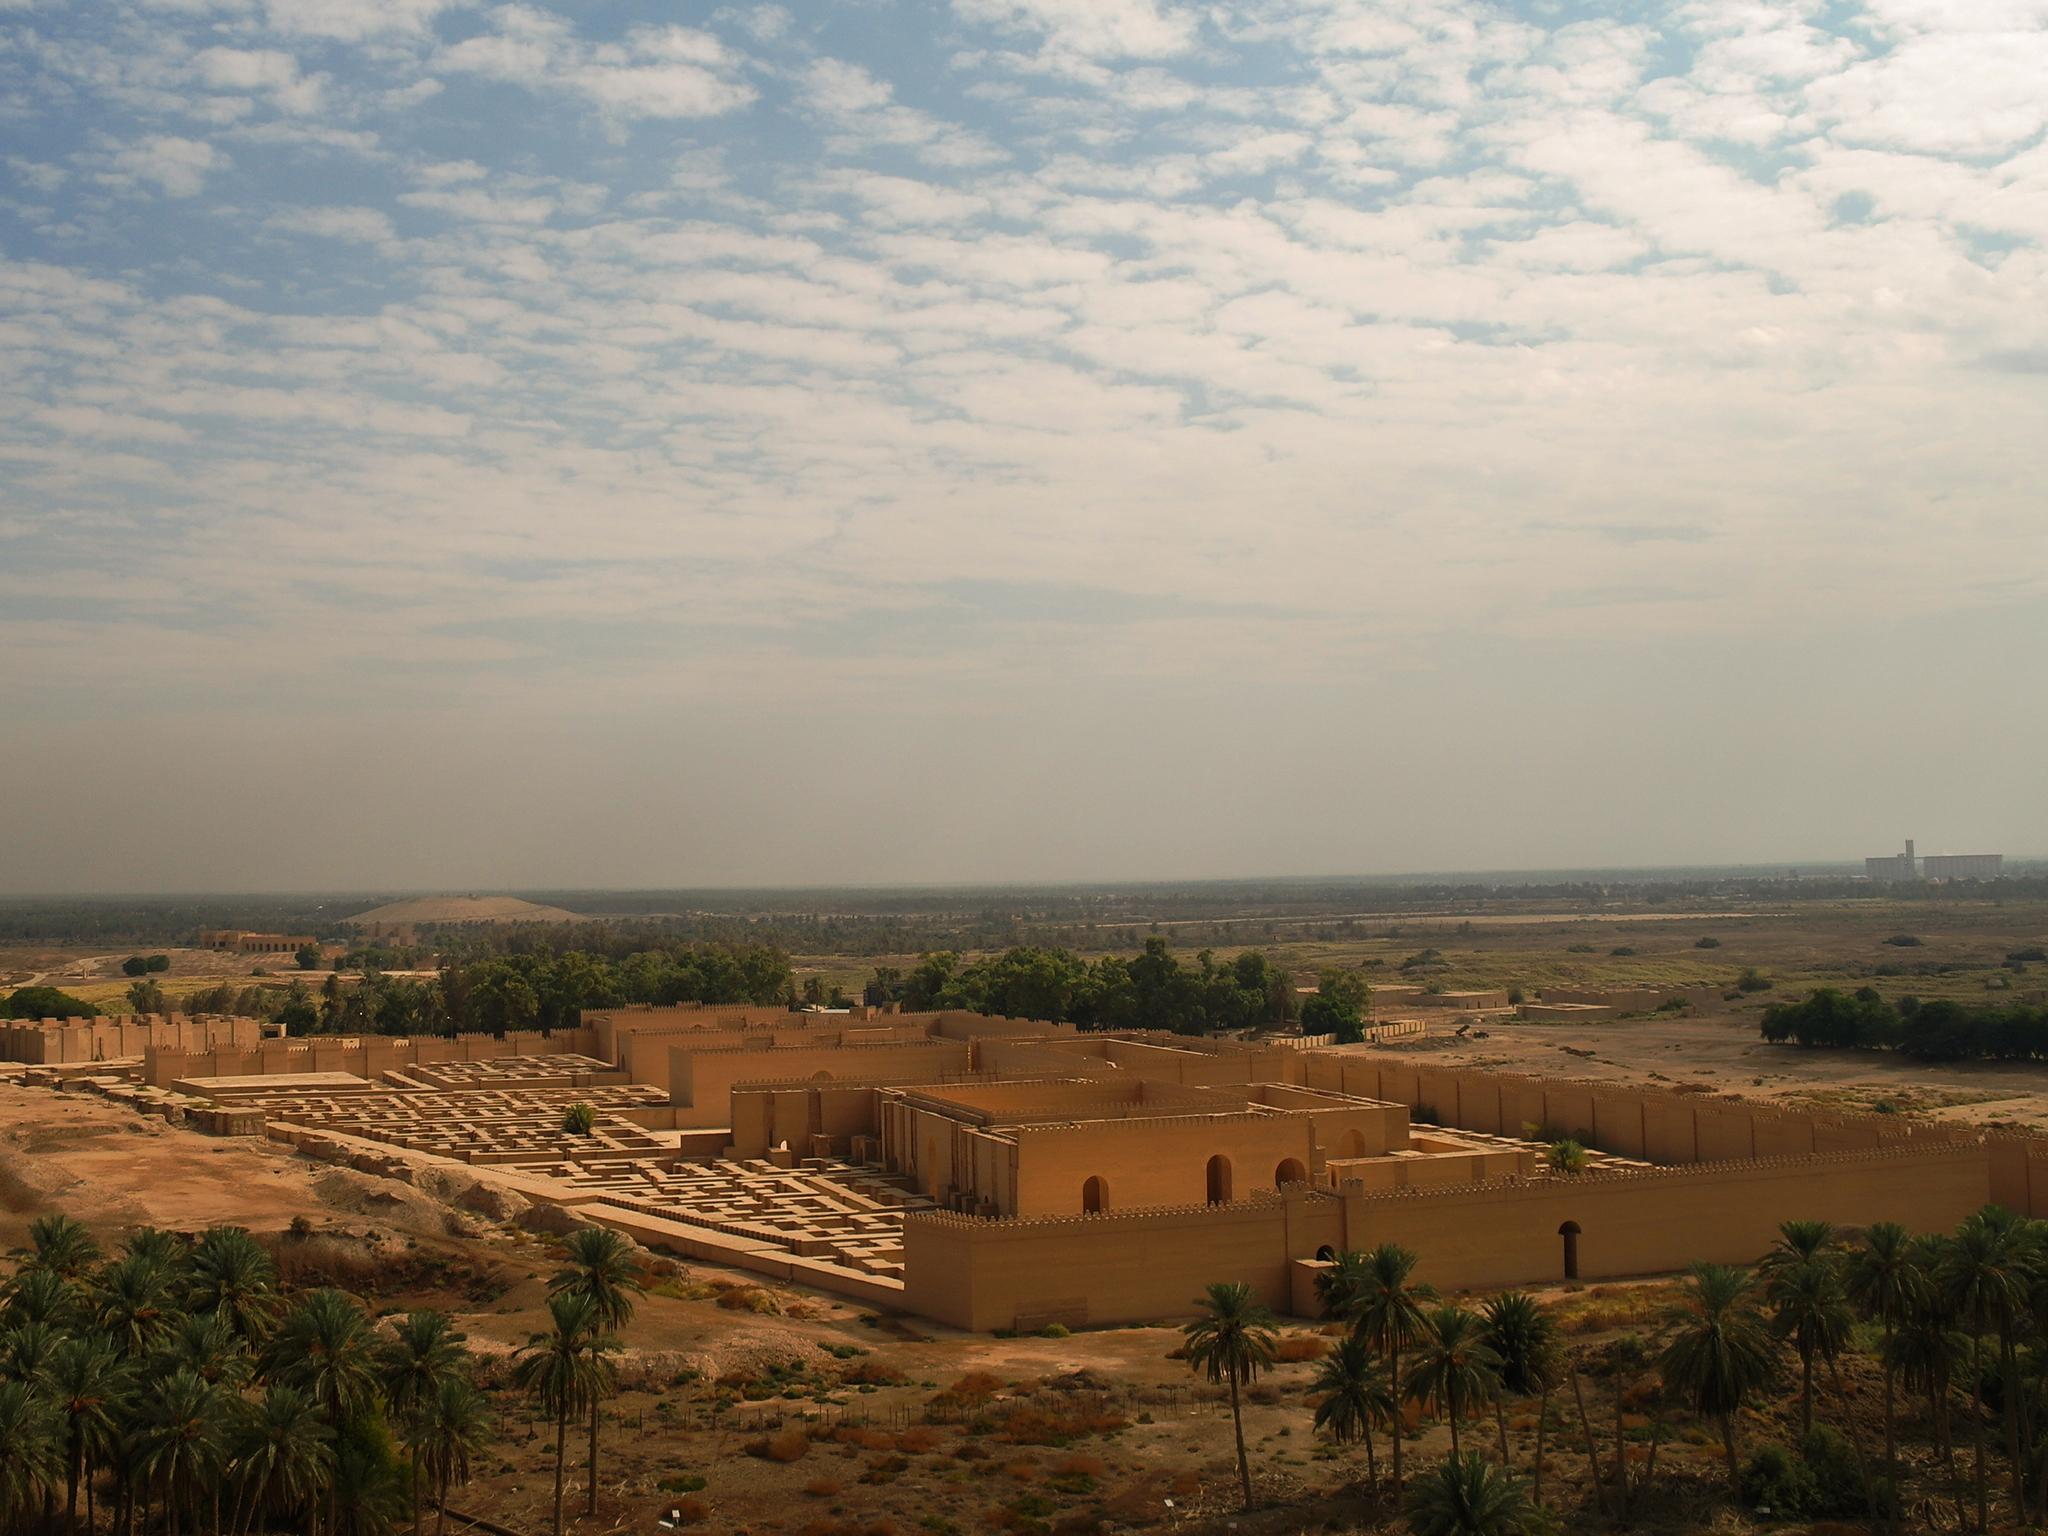 Babylon is the sixth world heritage site within Iraq